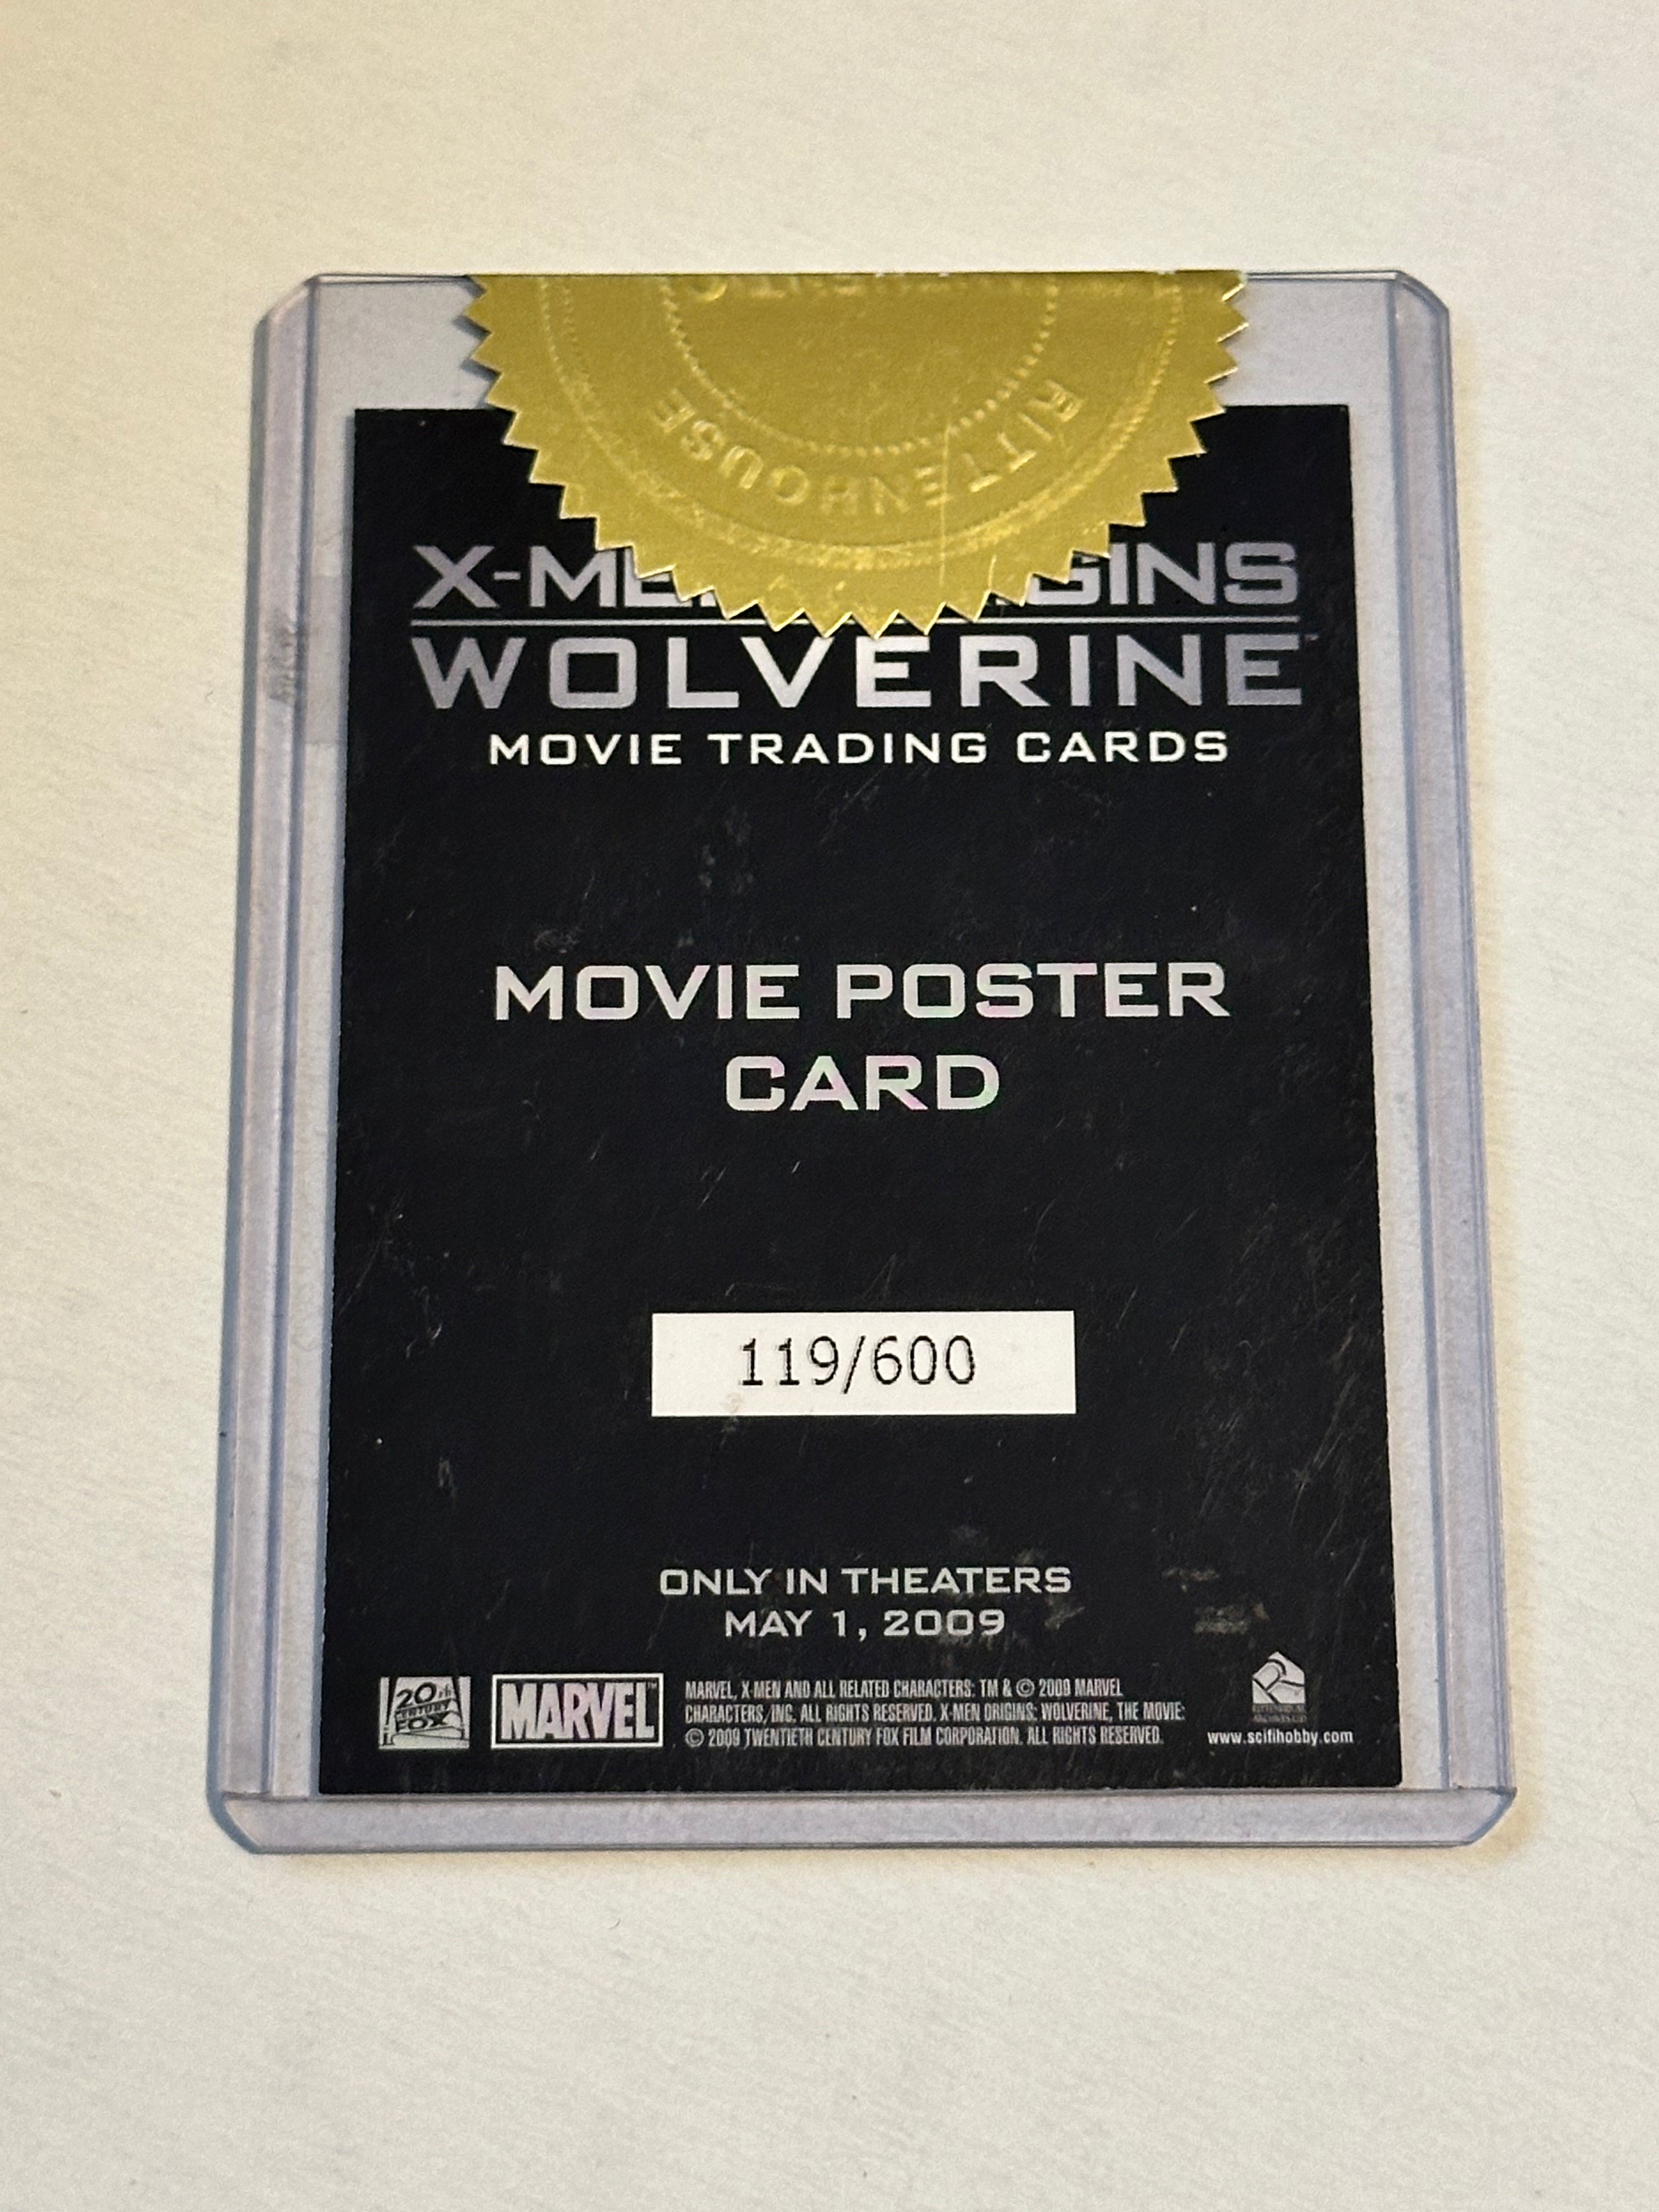 X-Men wolverine movie poster, rare numbered insert card with seal 2009